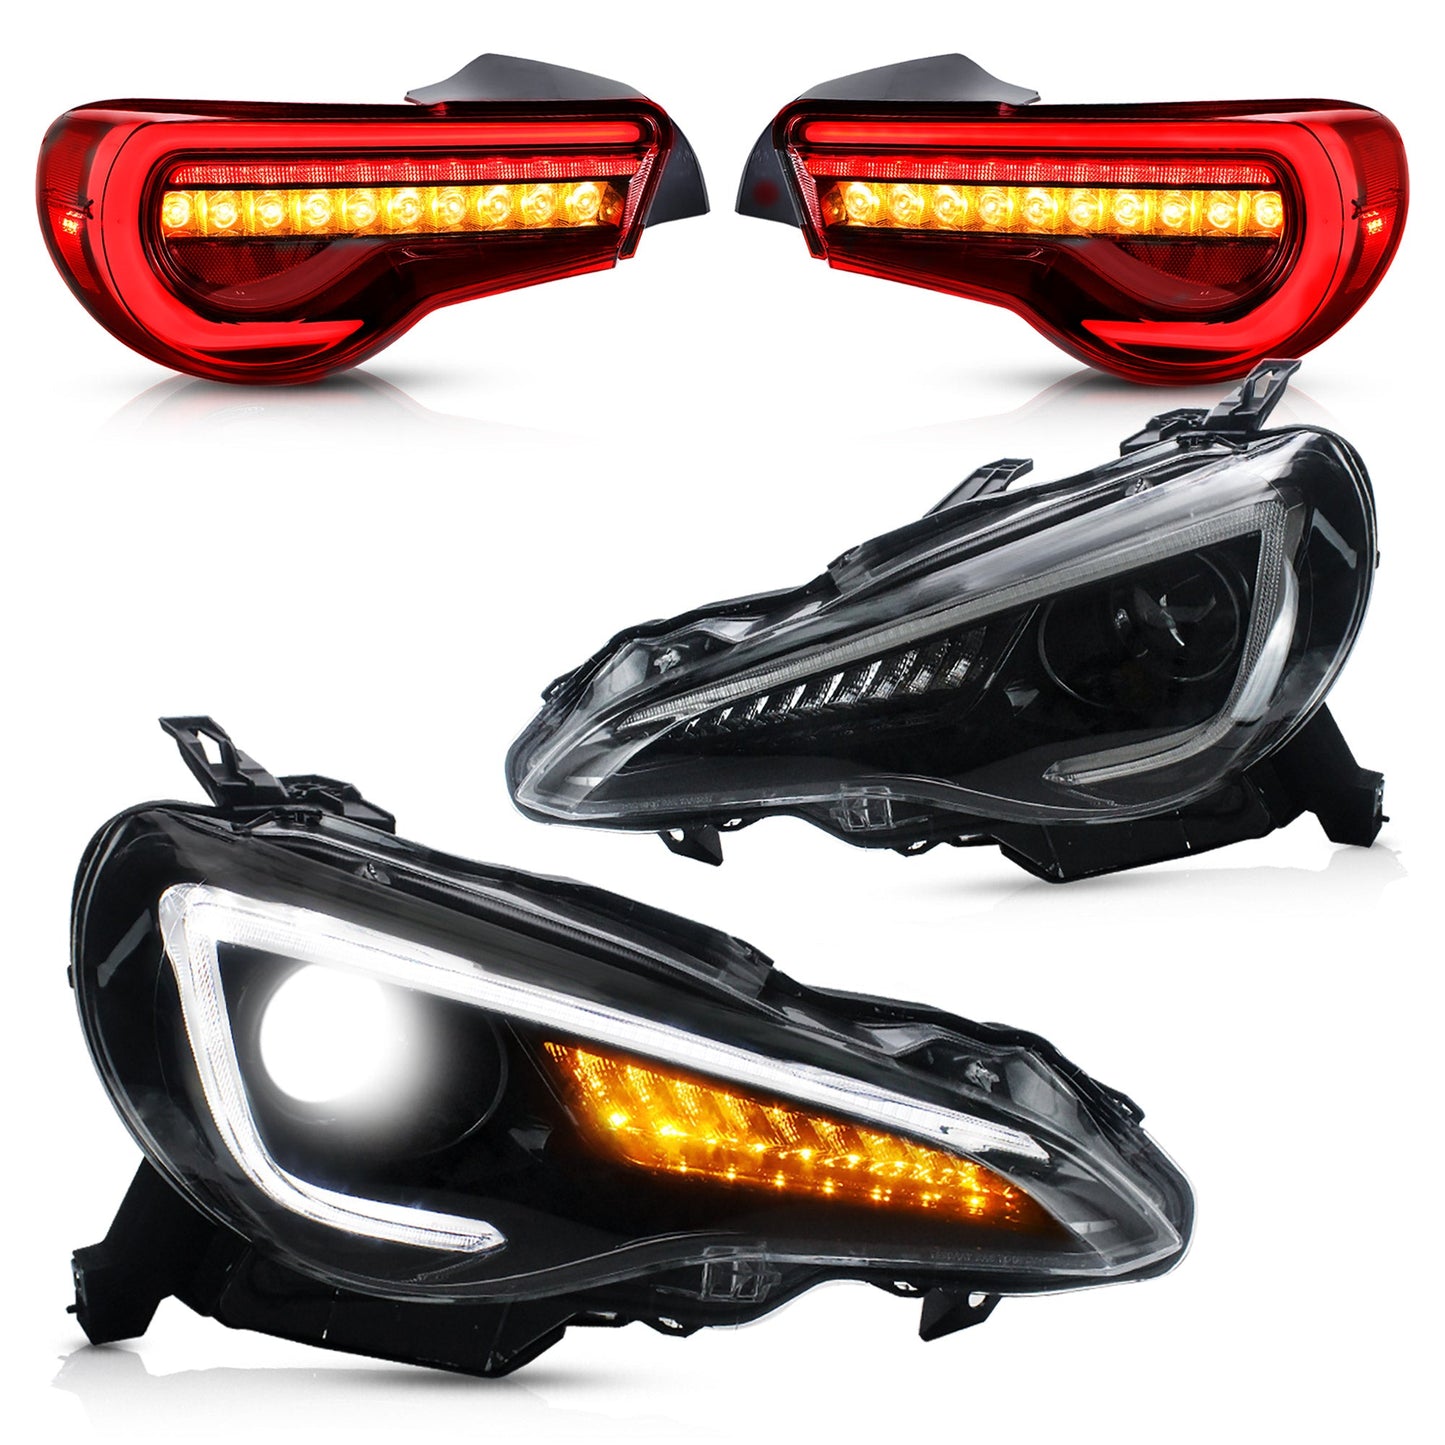 VLAND 13-16 FR-S / 17-20 Toyota 86 / 13-20 BRZ Set of Dual Beam Projector Headlights and Full LED Tail Lights